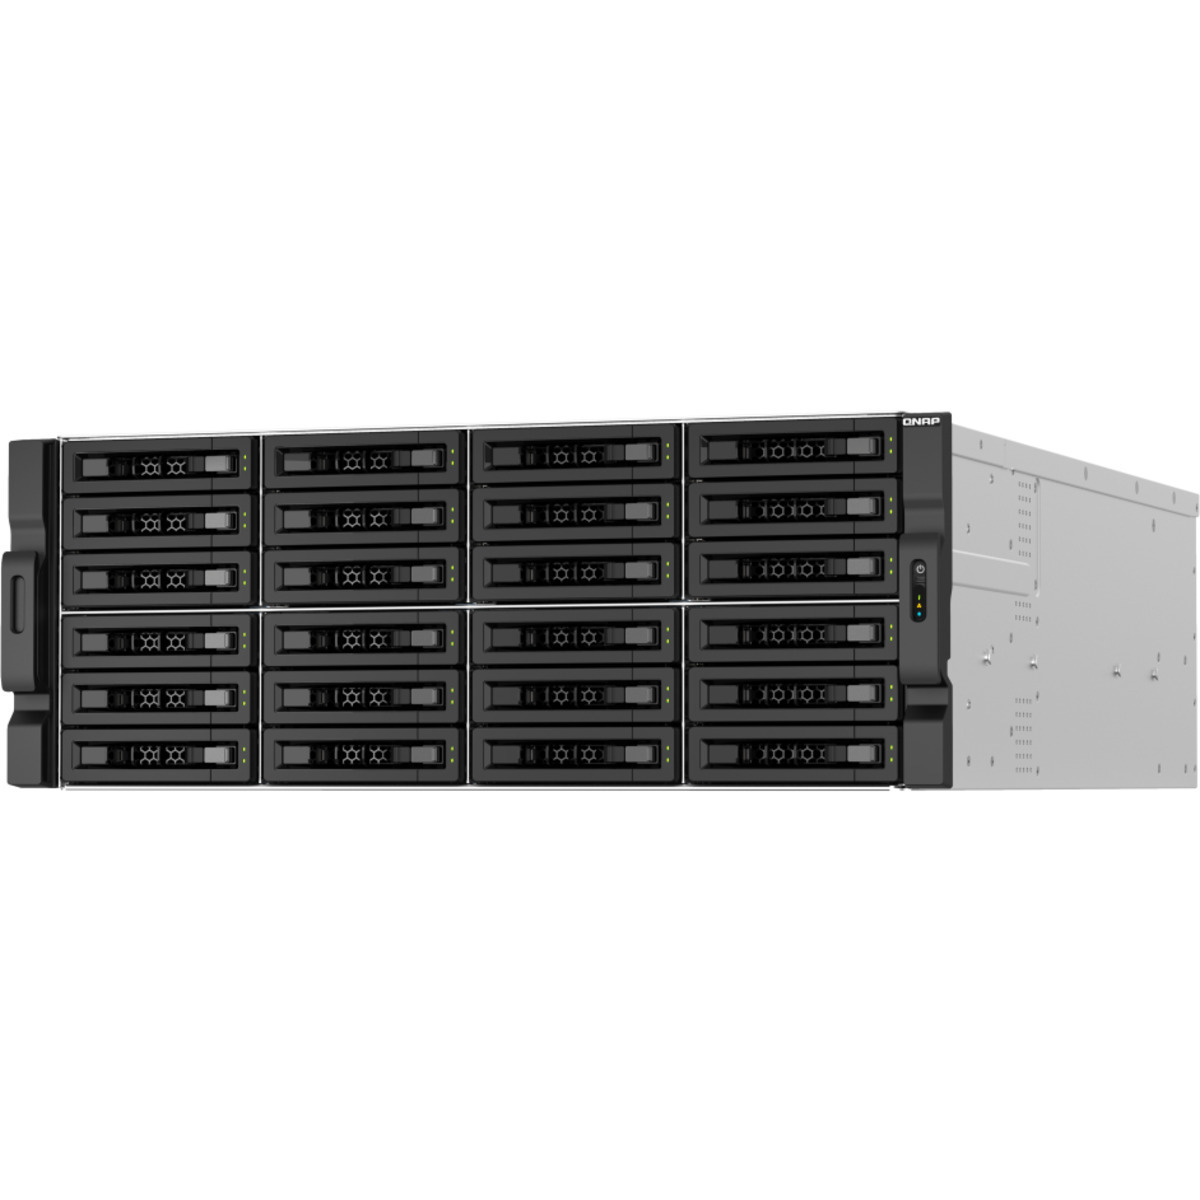 QNAP TS-h3087XU-RP-E2378 NAS - Network Attached Storage Device Burn-In Tested Configurations